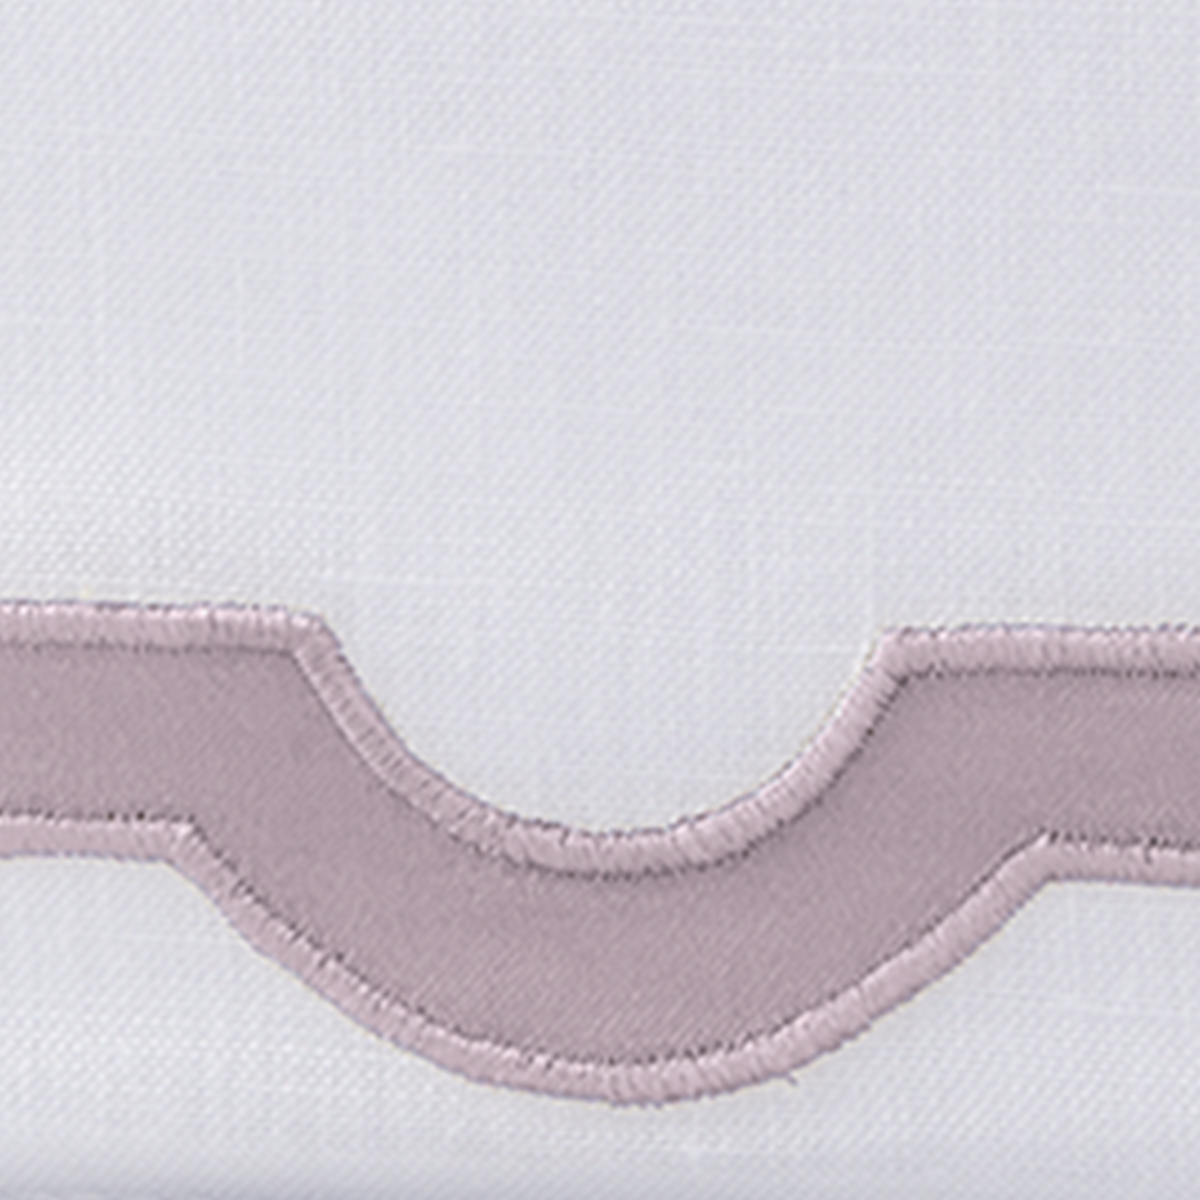 Swatch Sample of Matouk Mirasol Tissue Box Cover in Deep Lilac Color